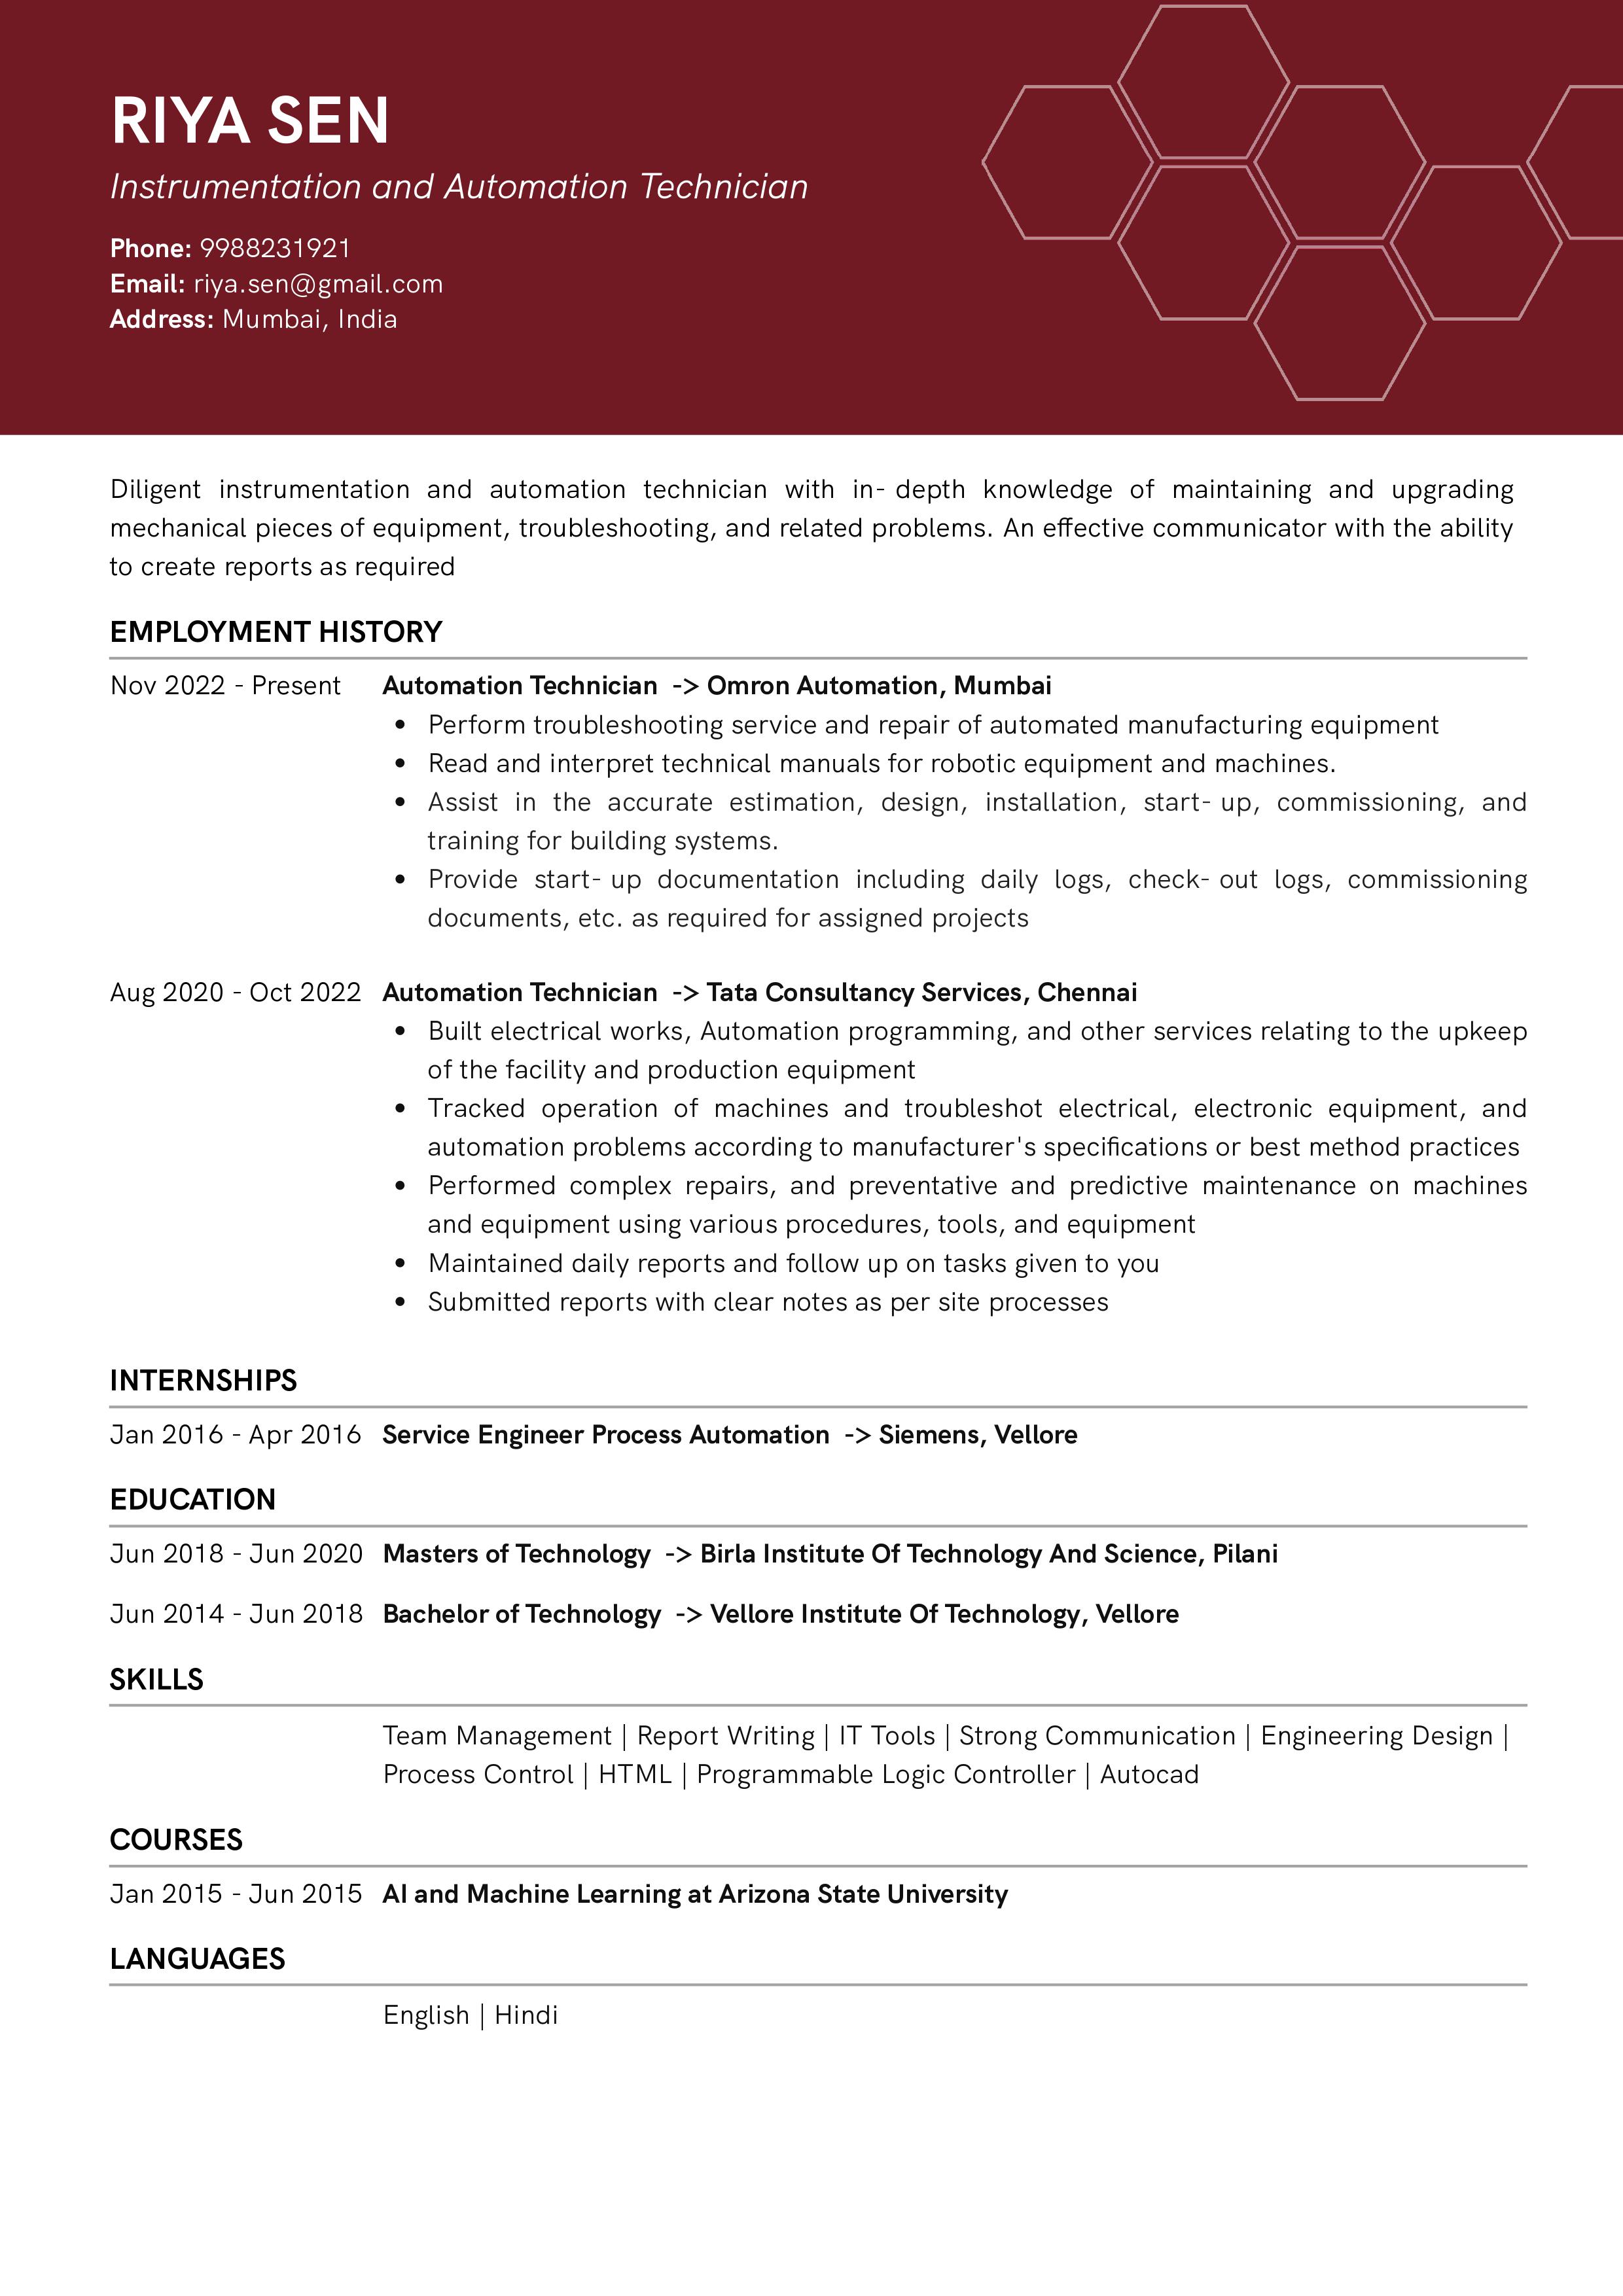 Resume of  Instrumentation and Automation Technician